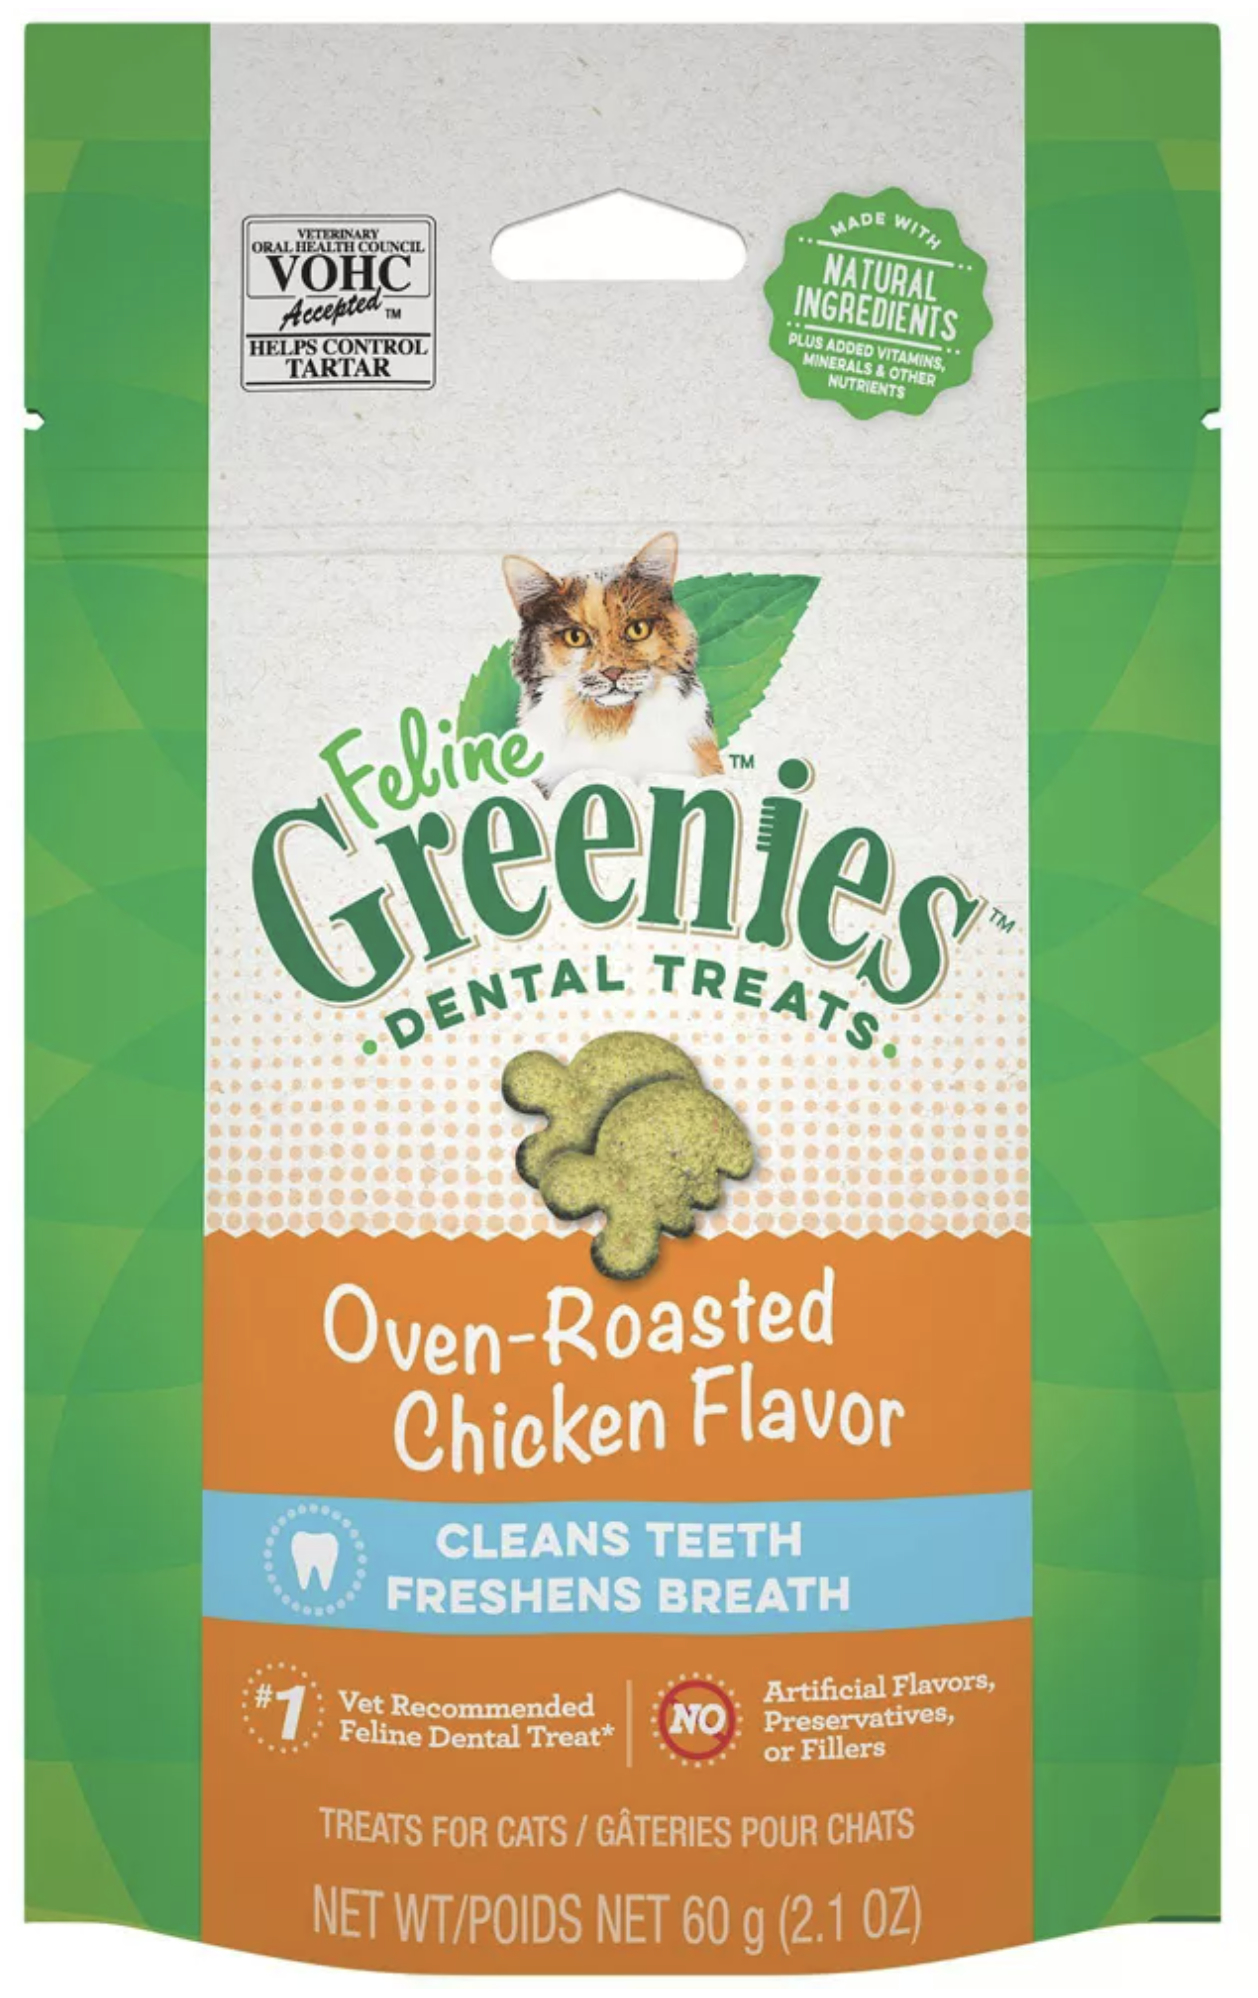 the bag of chicken-flavored greenies